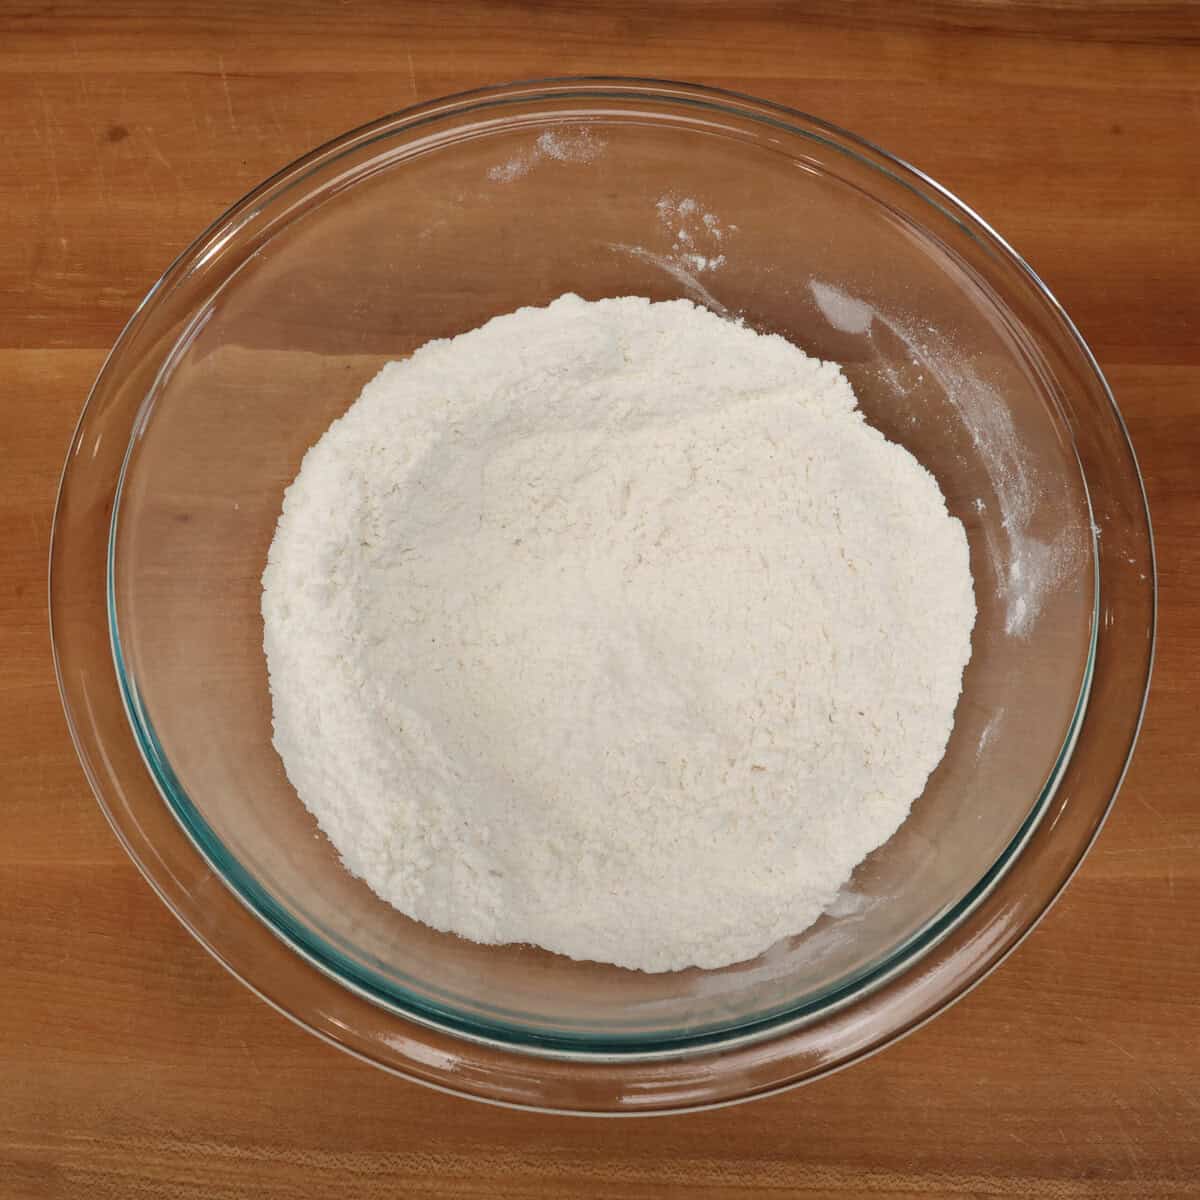 dry ingredients for biscuits in a mixing bowl.